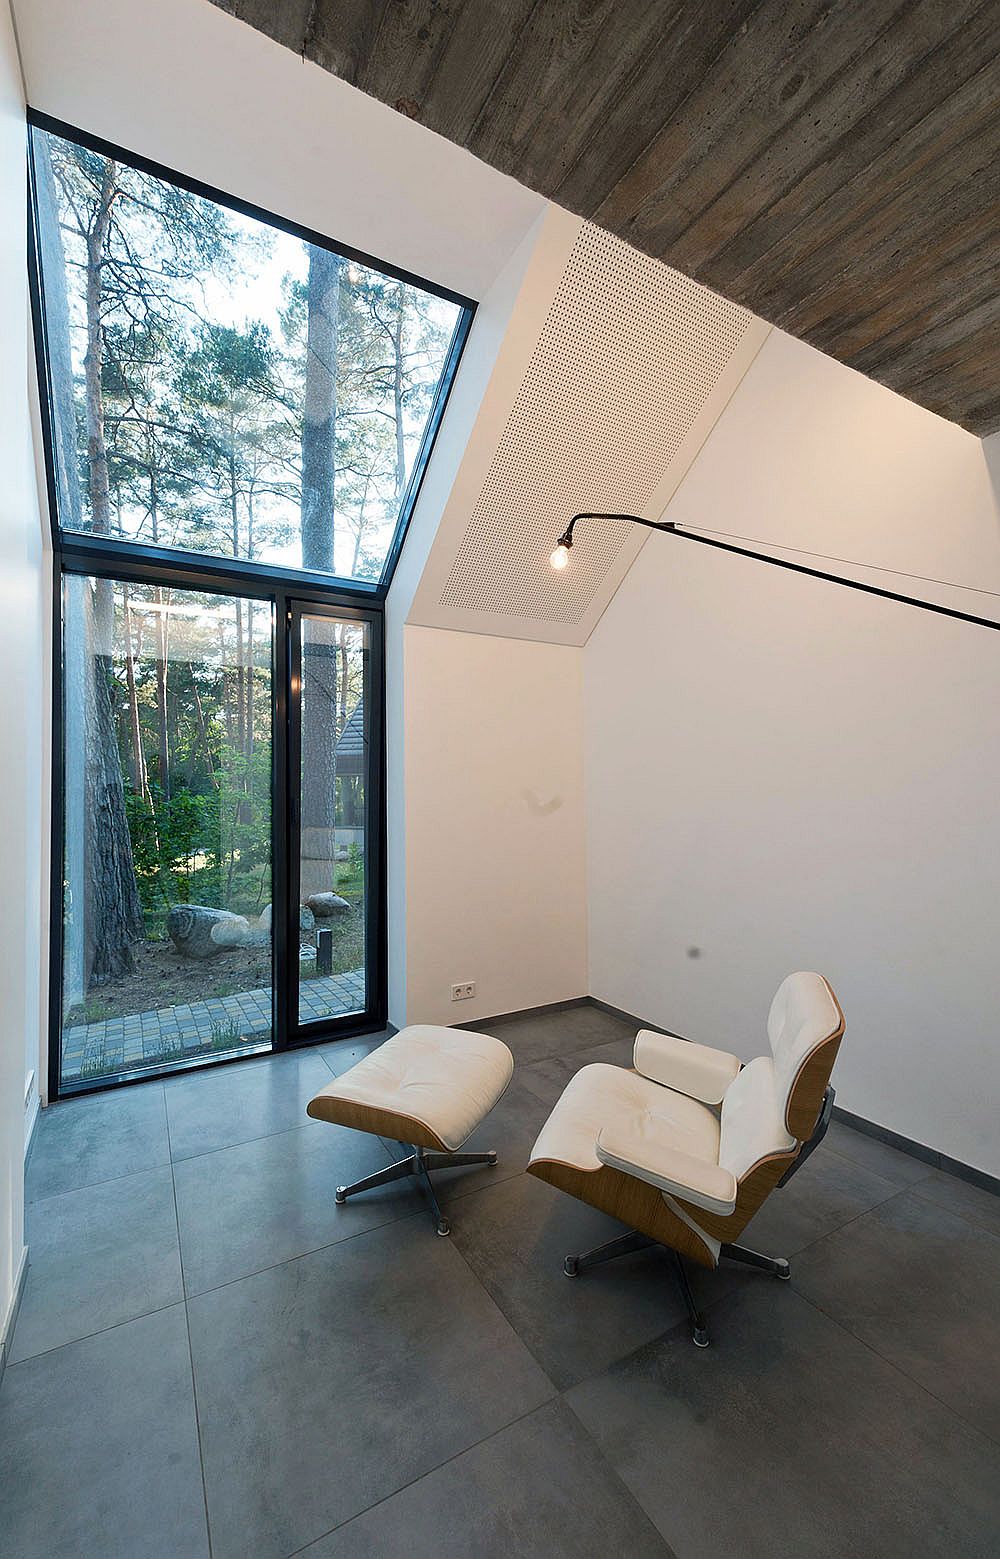 Iconic-Eames-Lounger-sits-inside-the-Bla